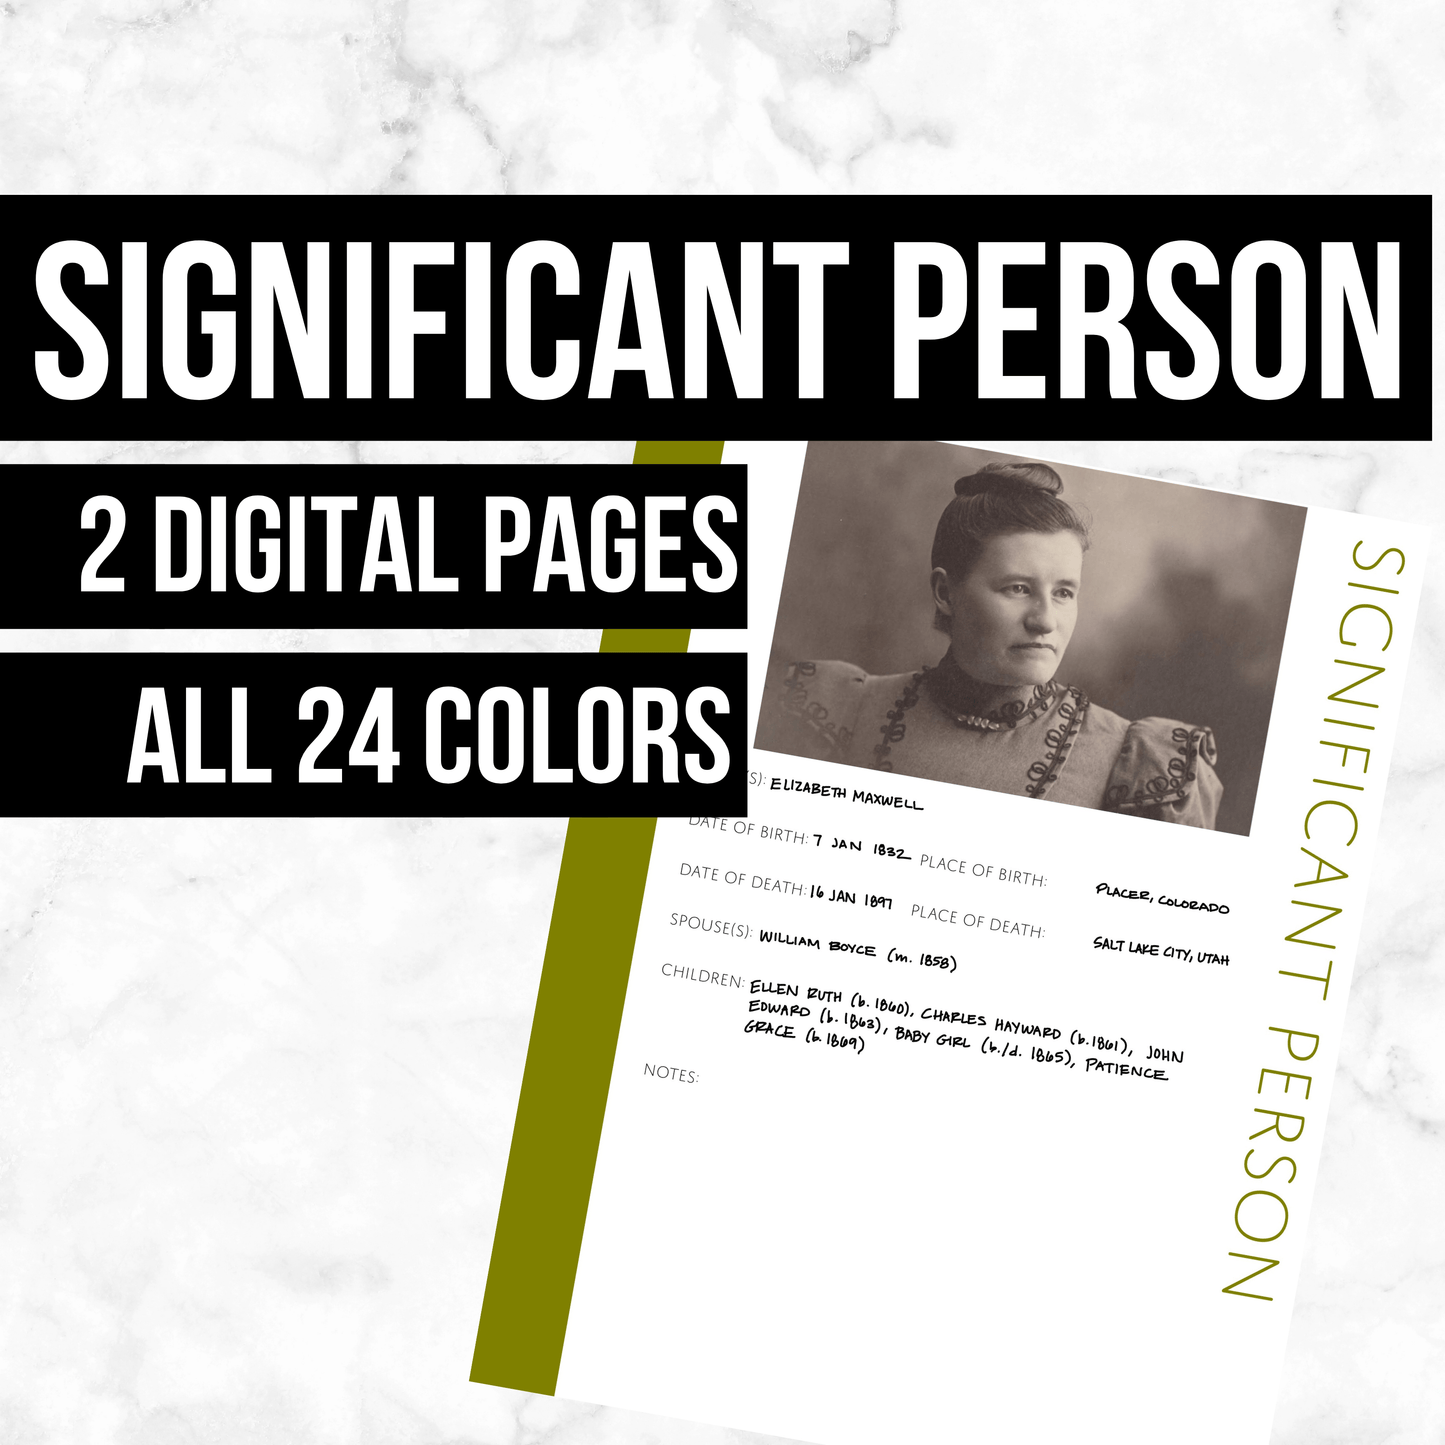 Significant Person Profile Page: Printable Genealogy Form (Digital Download)